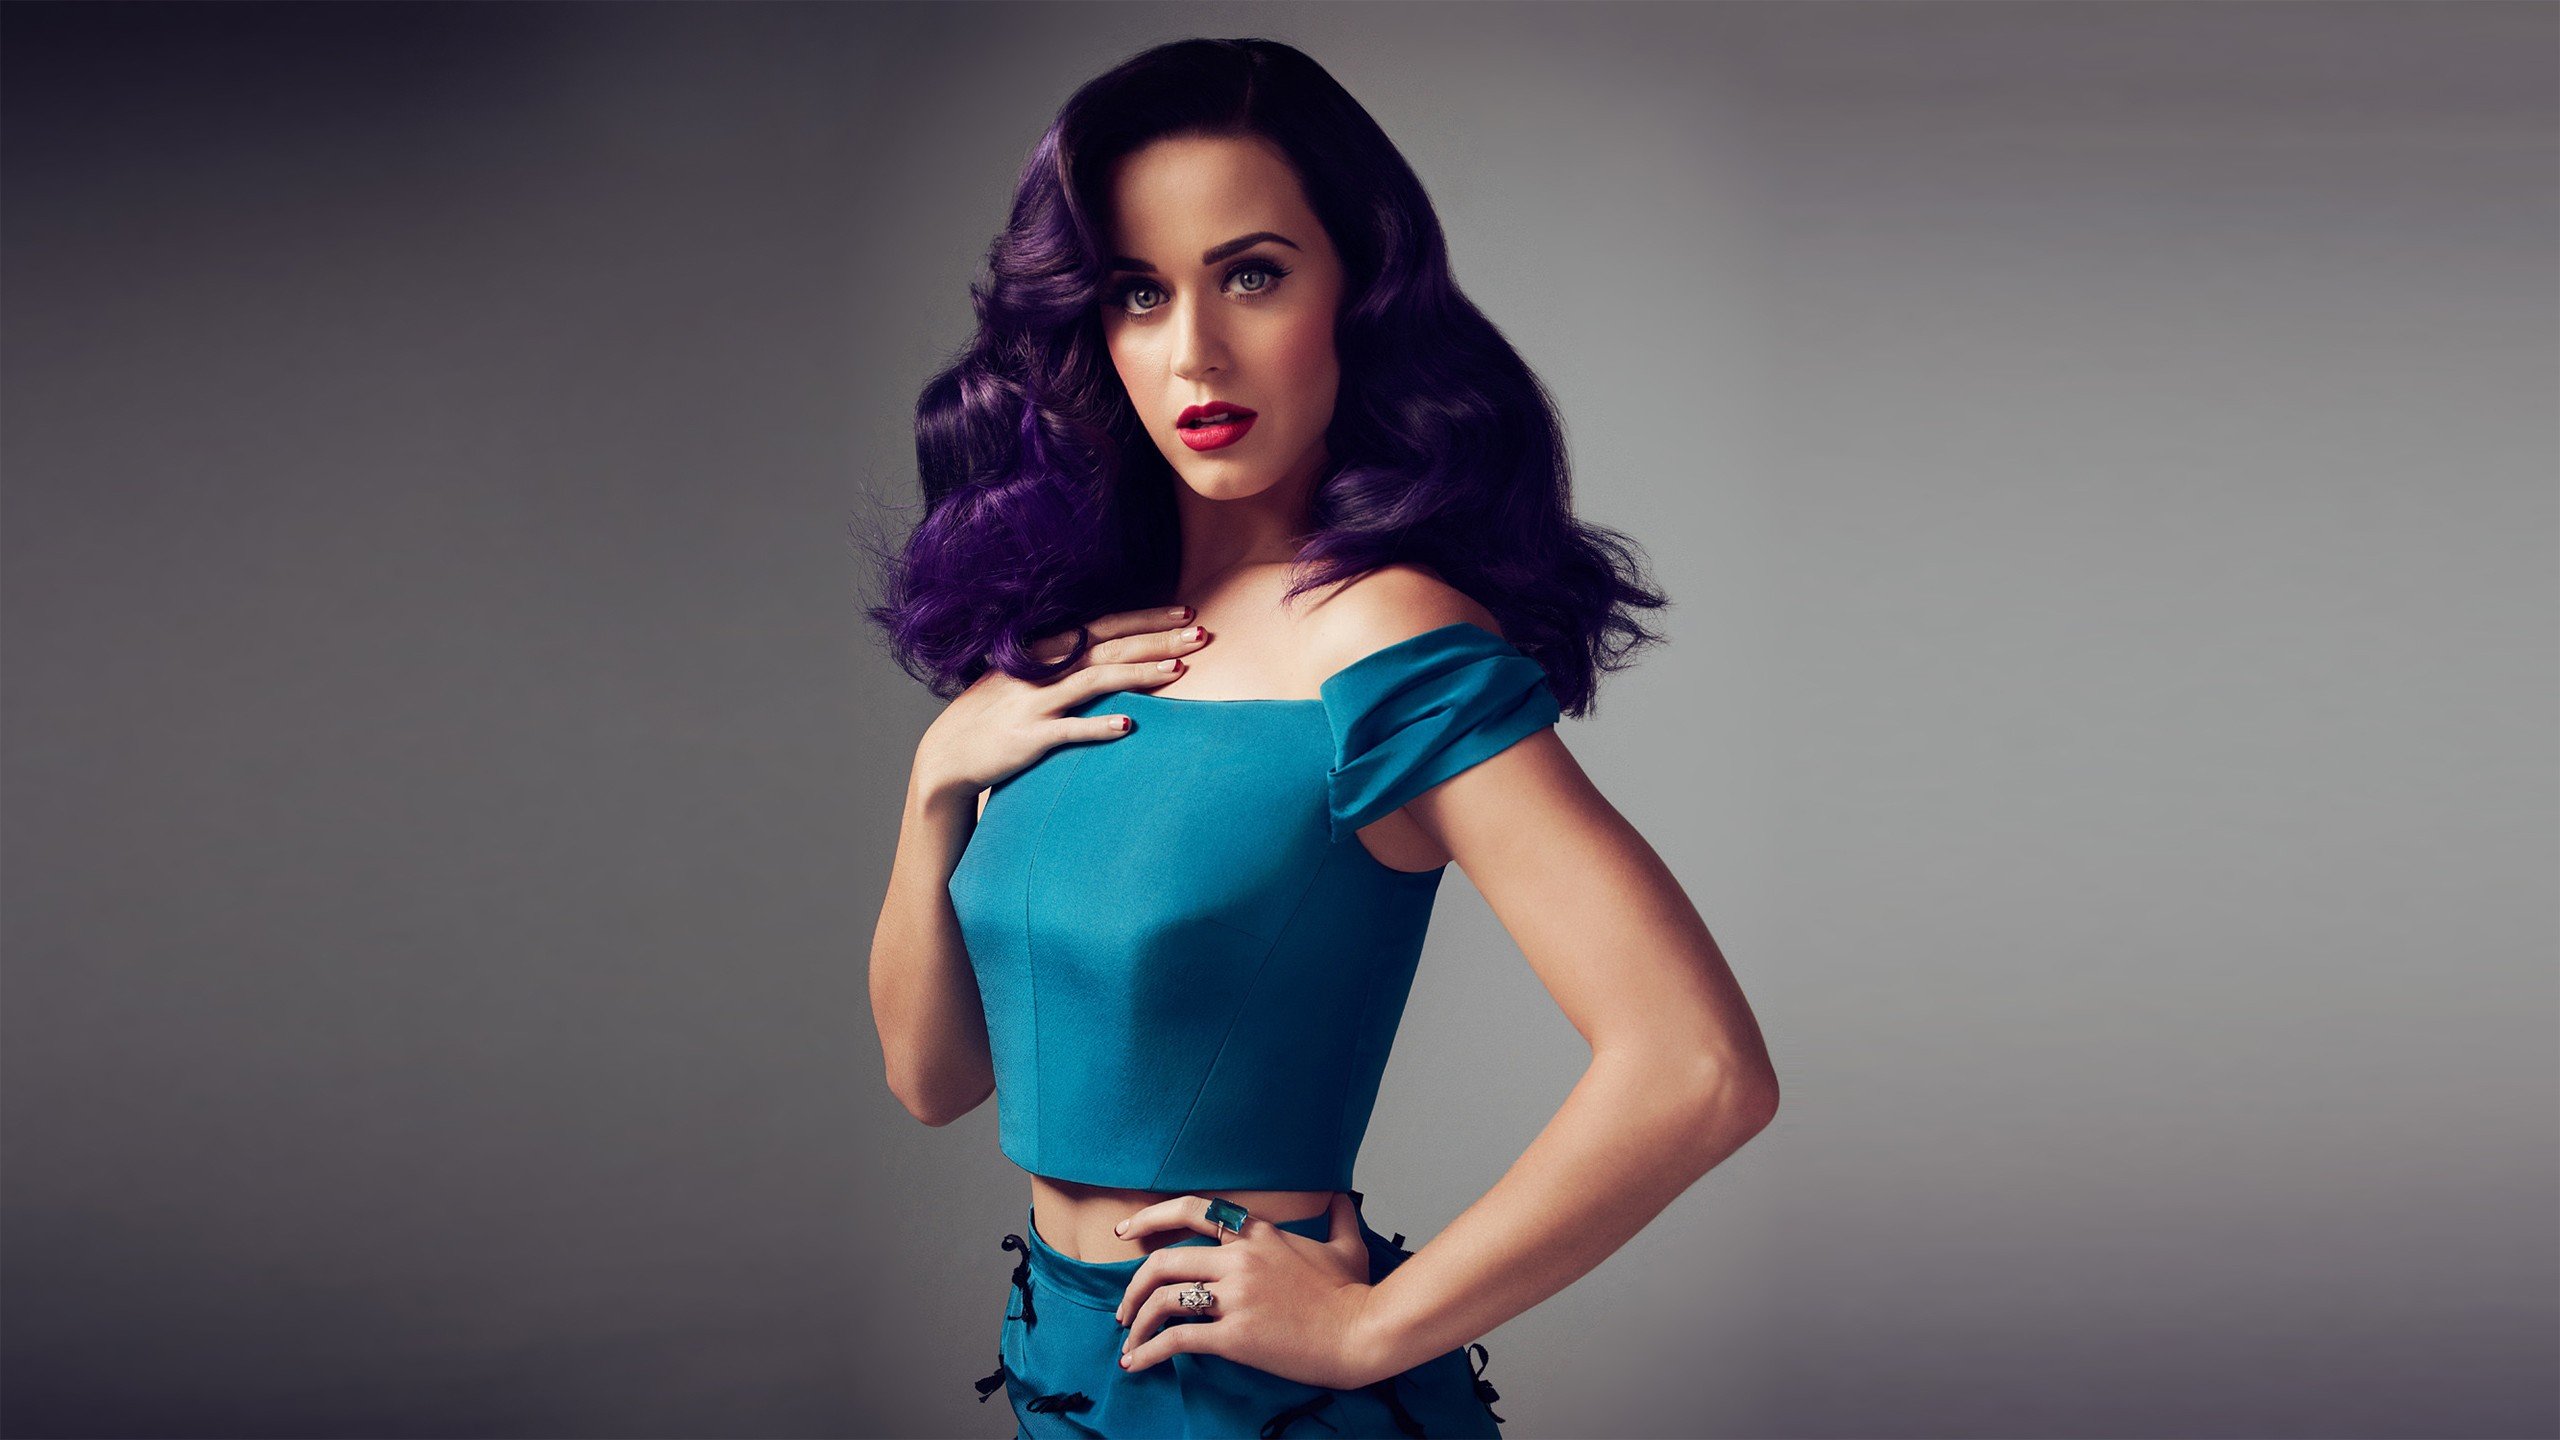 Free download Katy Perry background ID:121487 hd 2560x1440 for computer